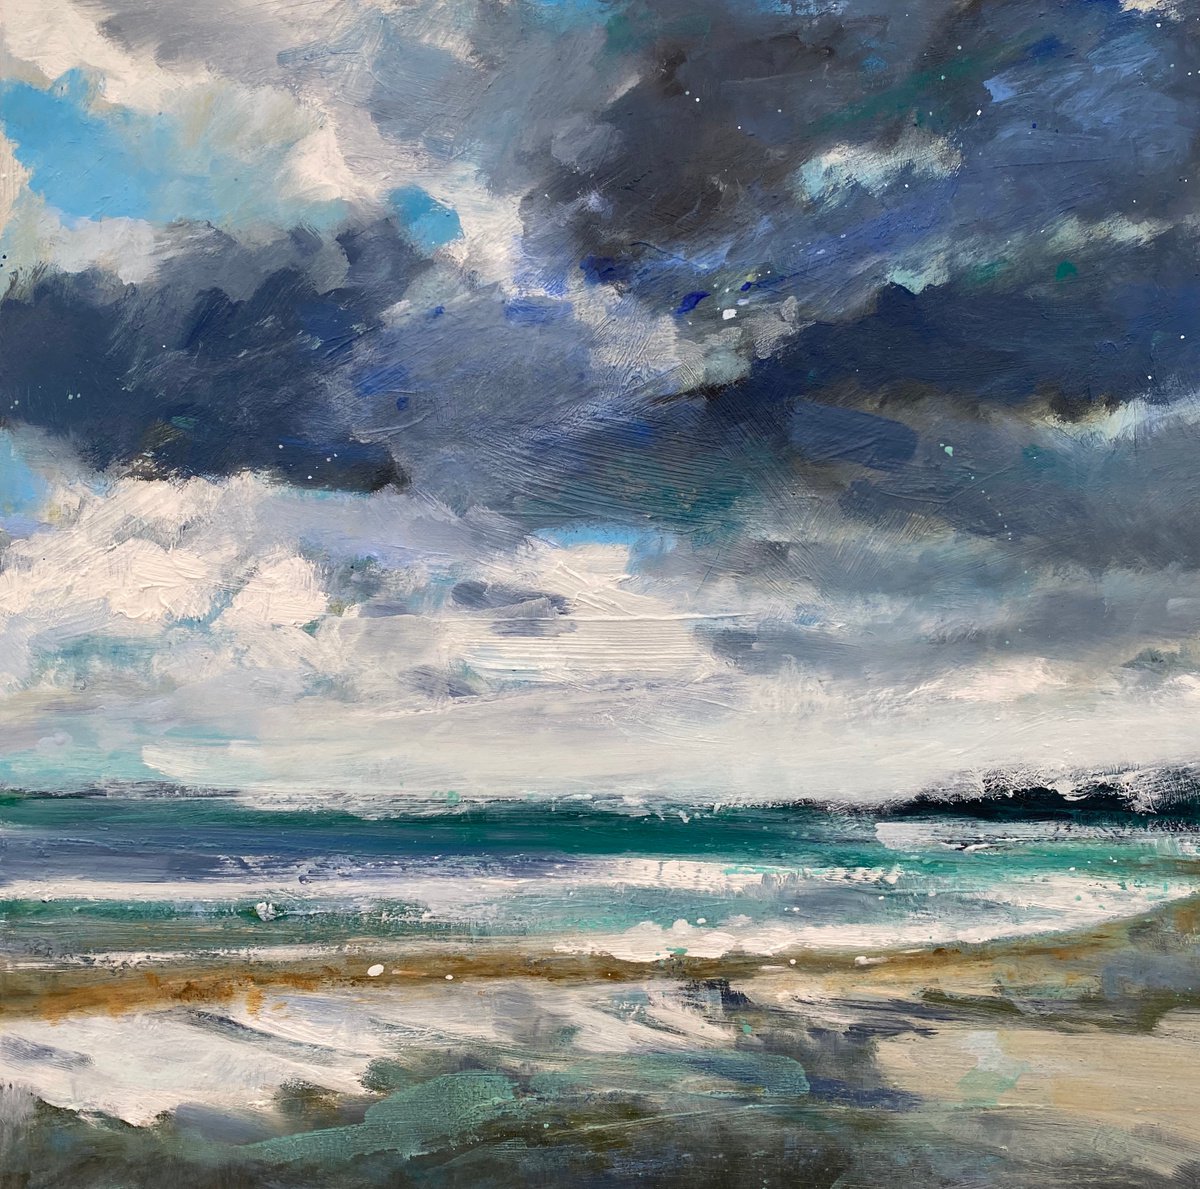 Rain clouds Over Porthminster Beach by Andrew Field